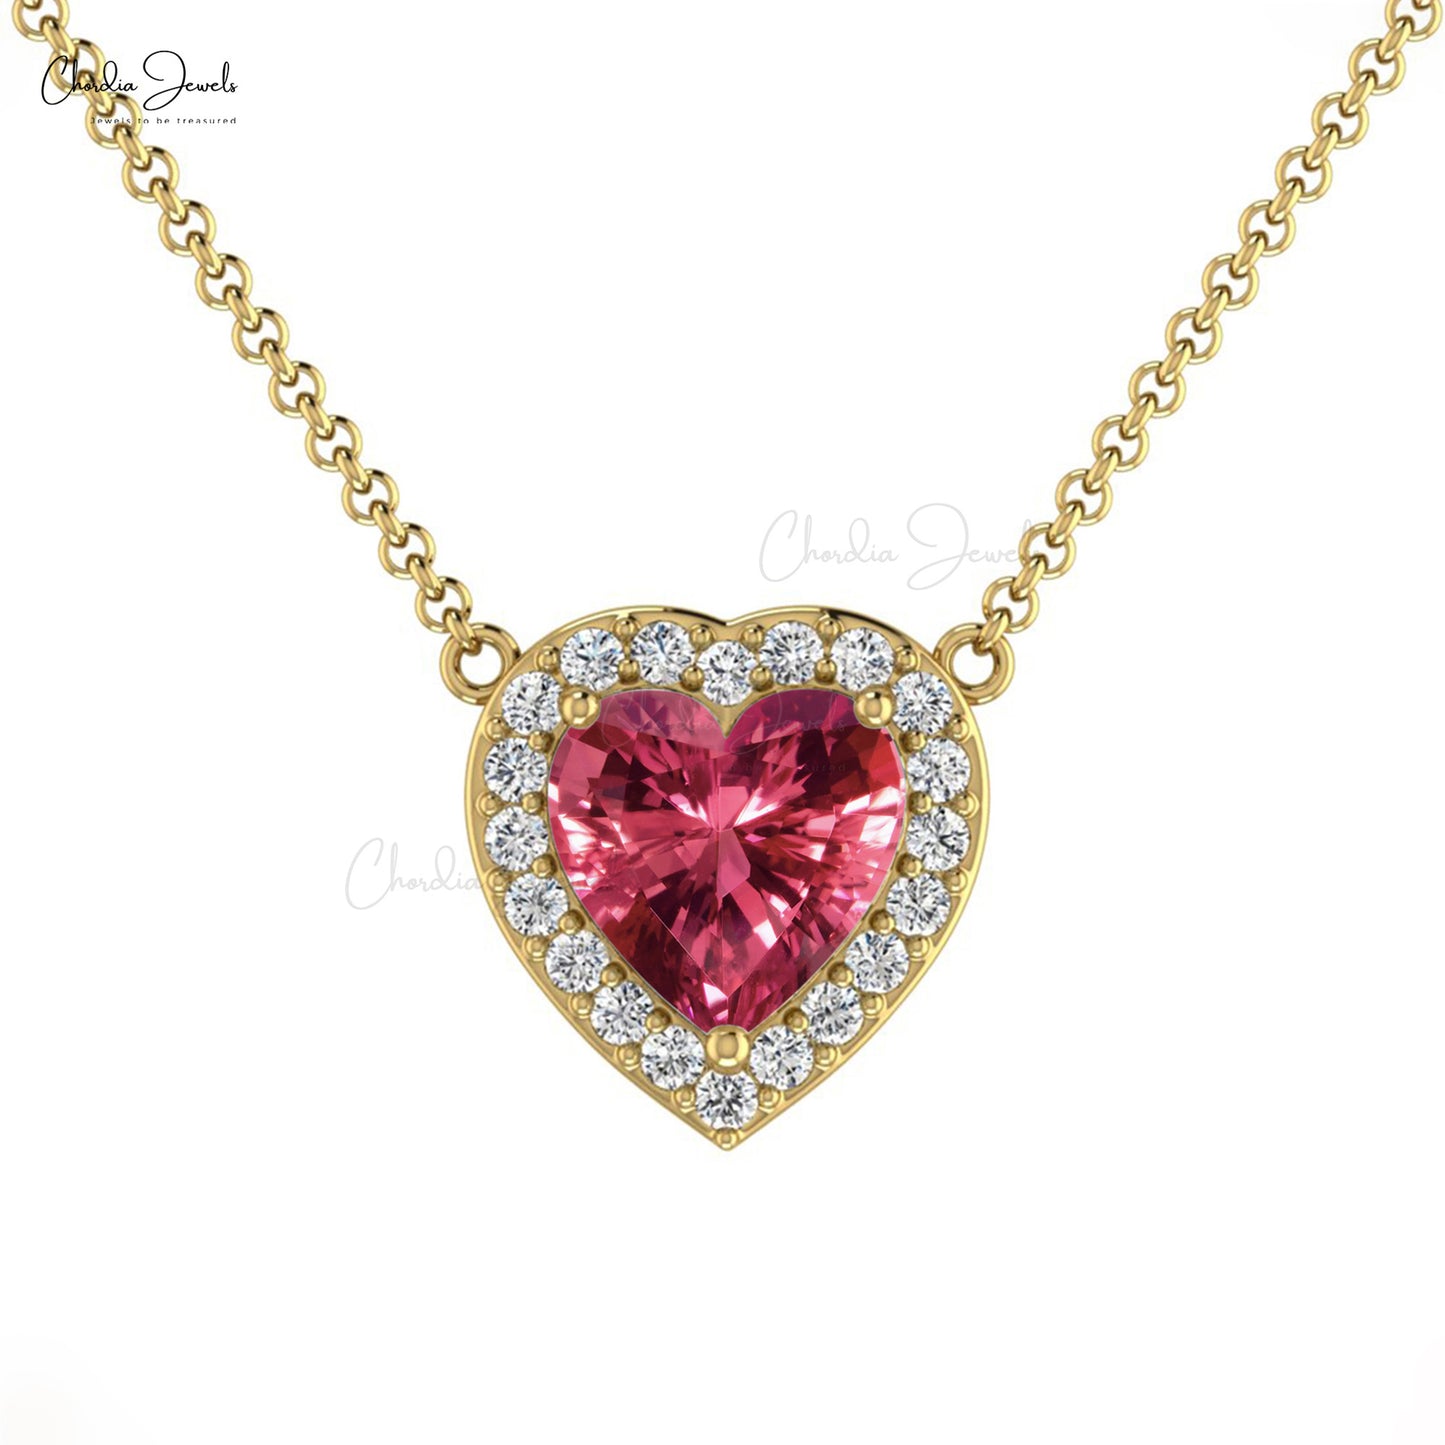 October Birthstone Jewelry 14K Solid White Gold Pink Tourmaline & Diamond Halo Heart Necklace